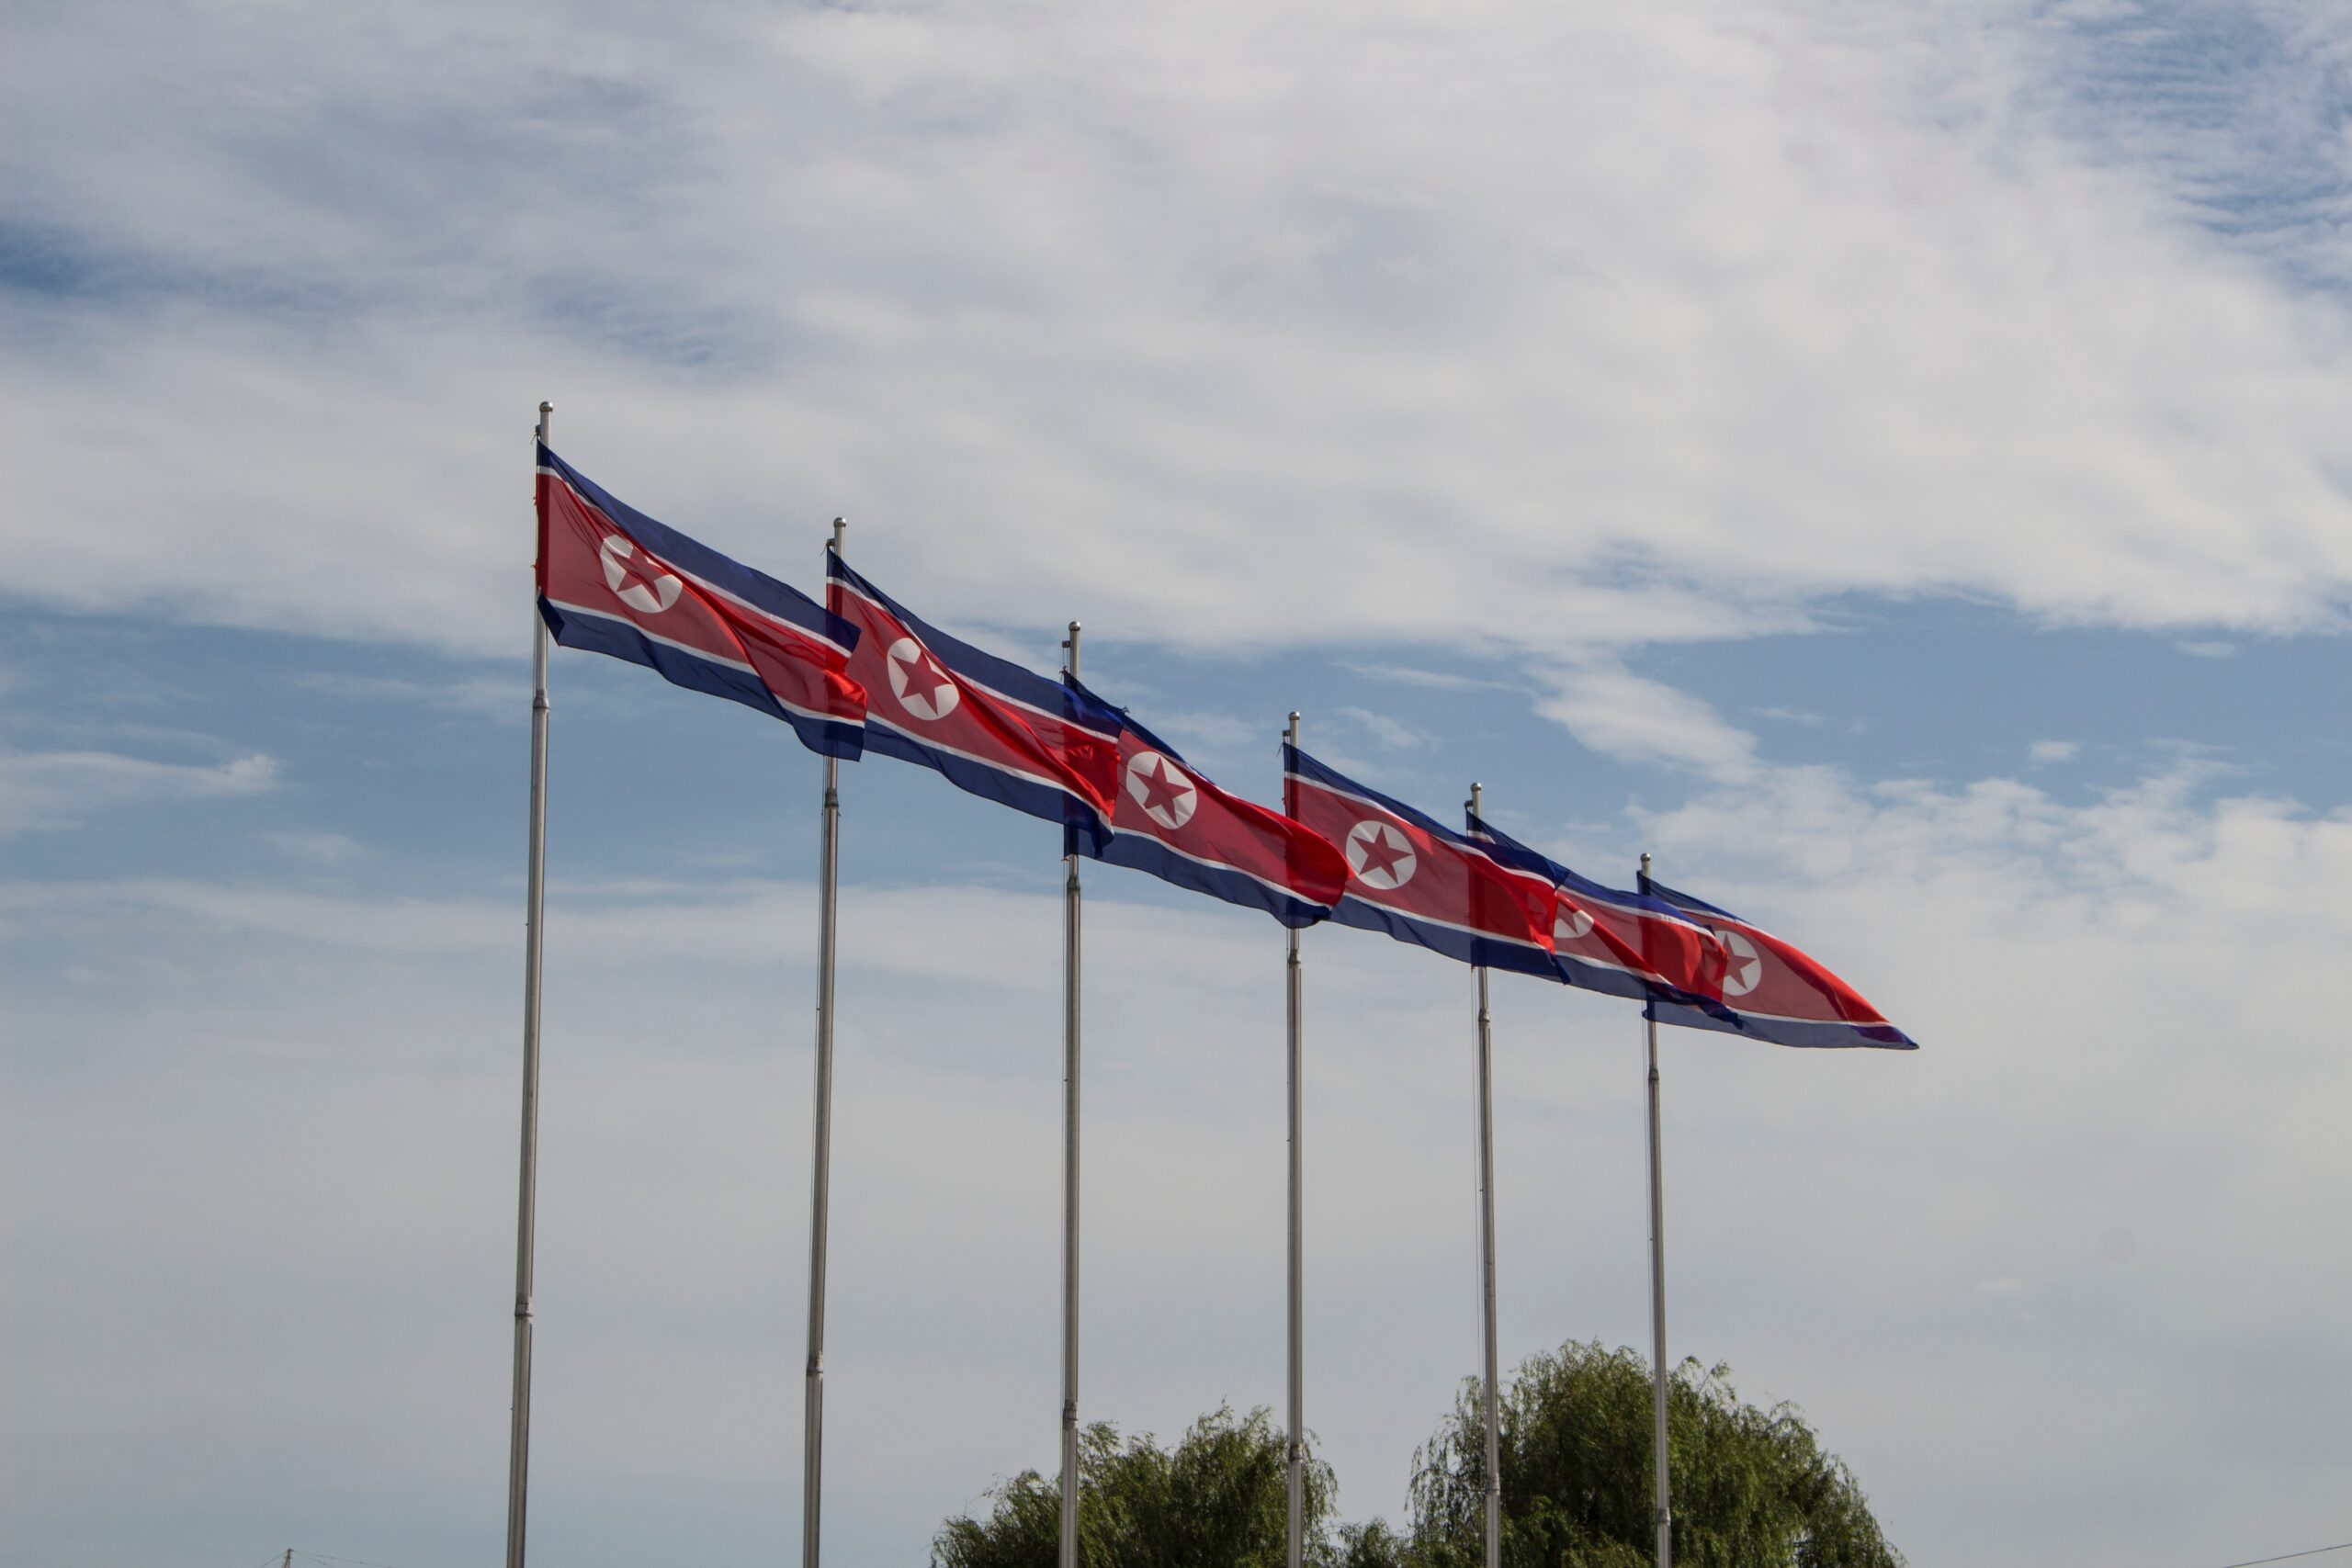 A photograph of a row of flagpoles with flags of the Democratic People's Republic of Korea against a blue sky with clouds.